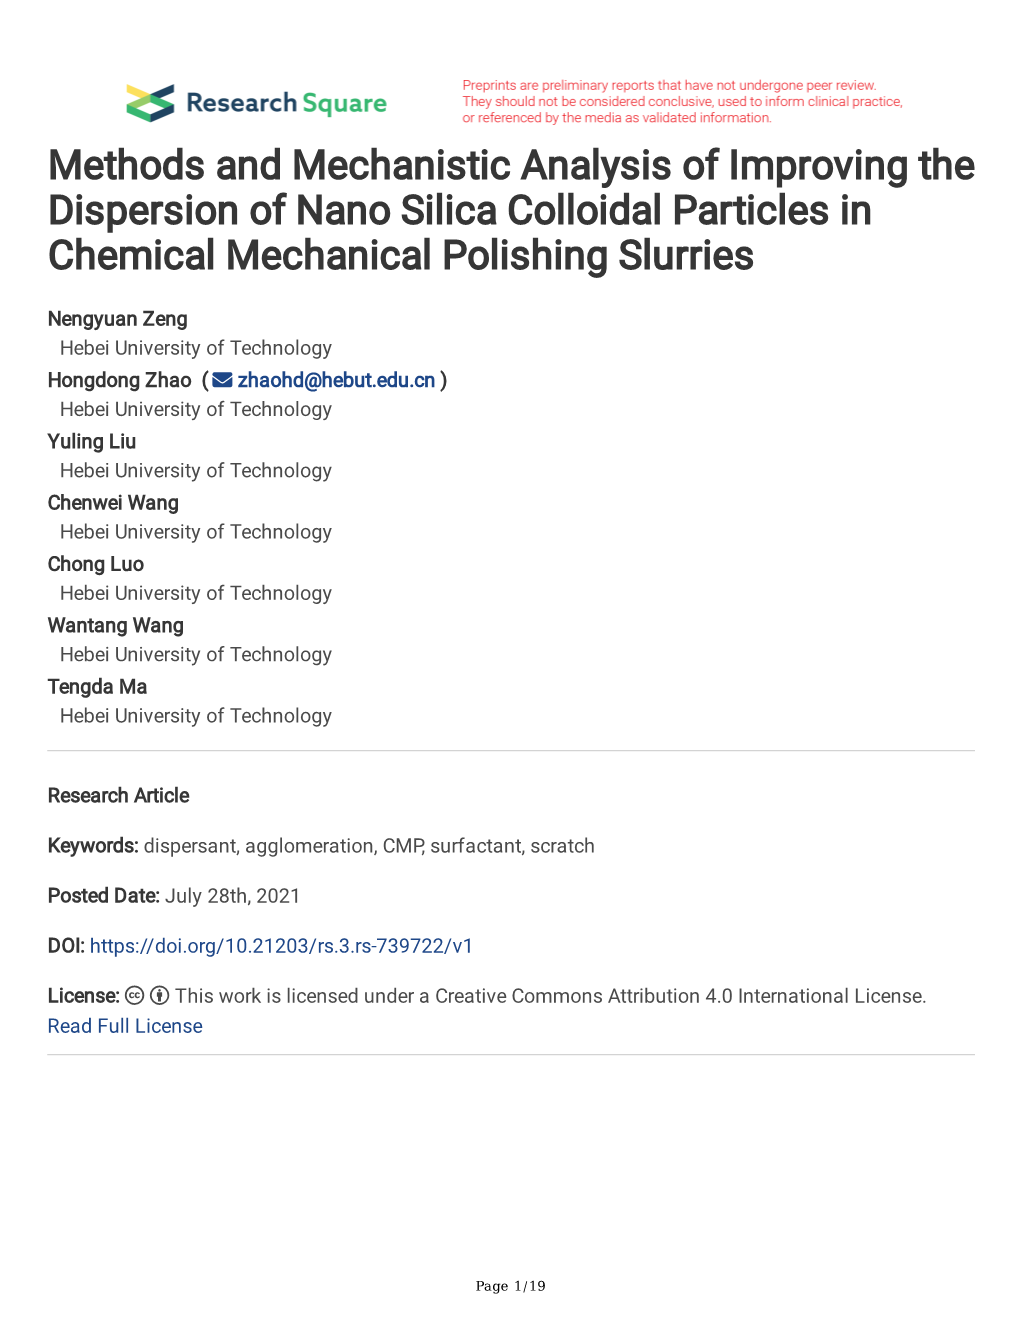 Methods and Mechanistic Analysis of Improving the Dispersion of Nano Silica Colloidal Particles in Chemical Mechanical Polishing Slurries